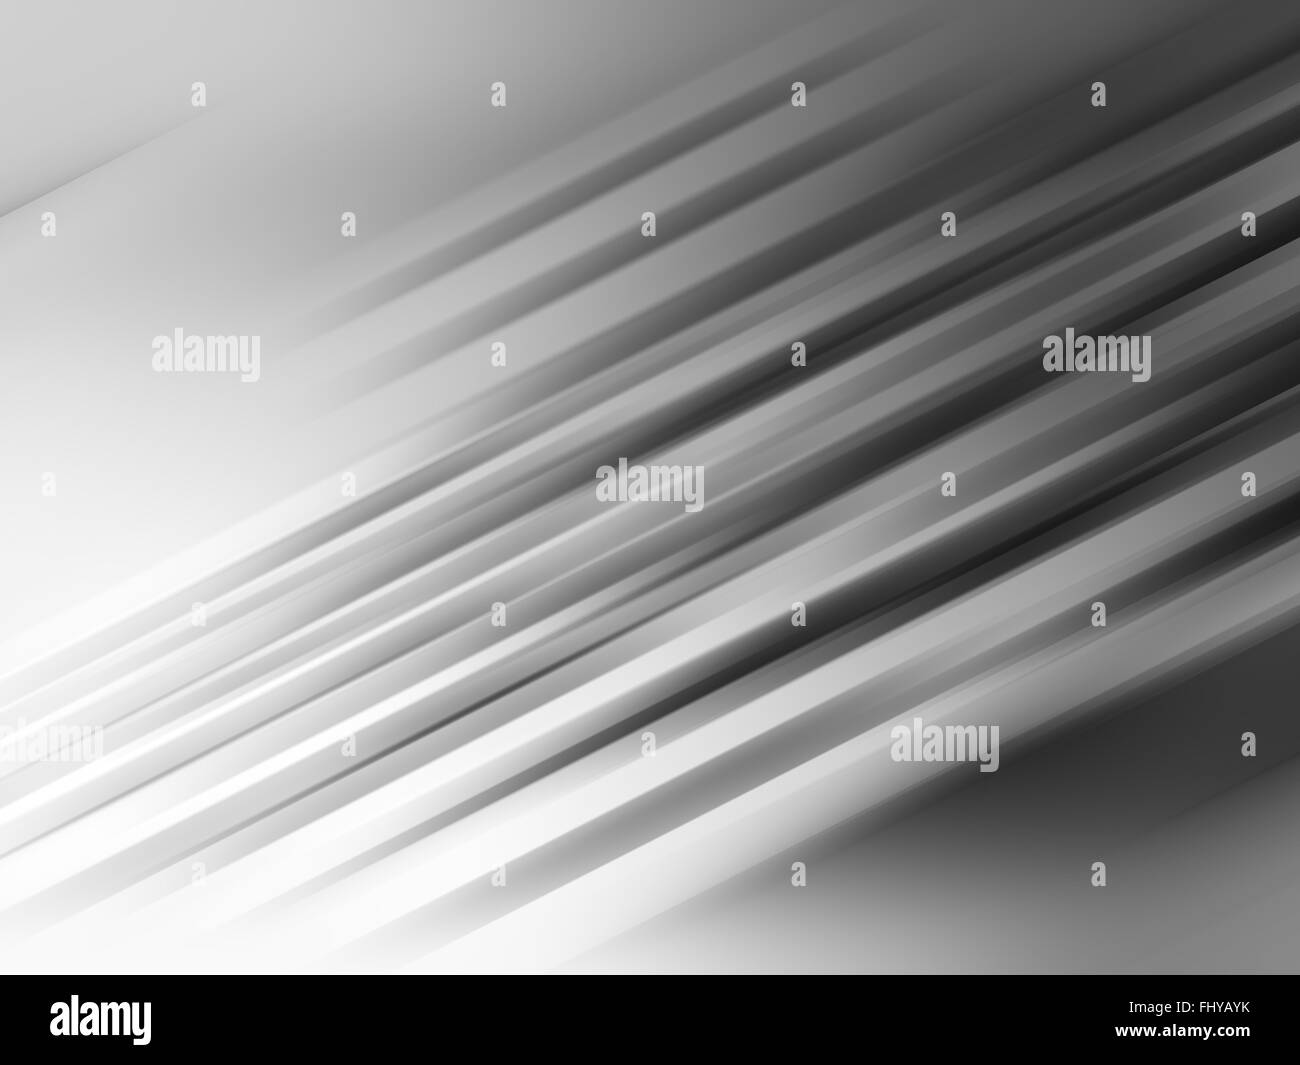 Abstract digital background with shining blurred lines pattern Stock Photo